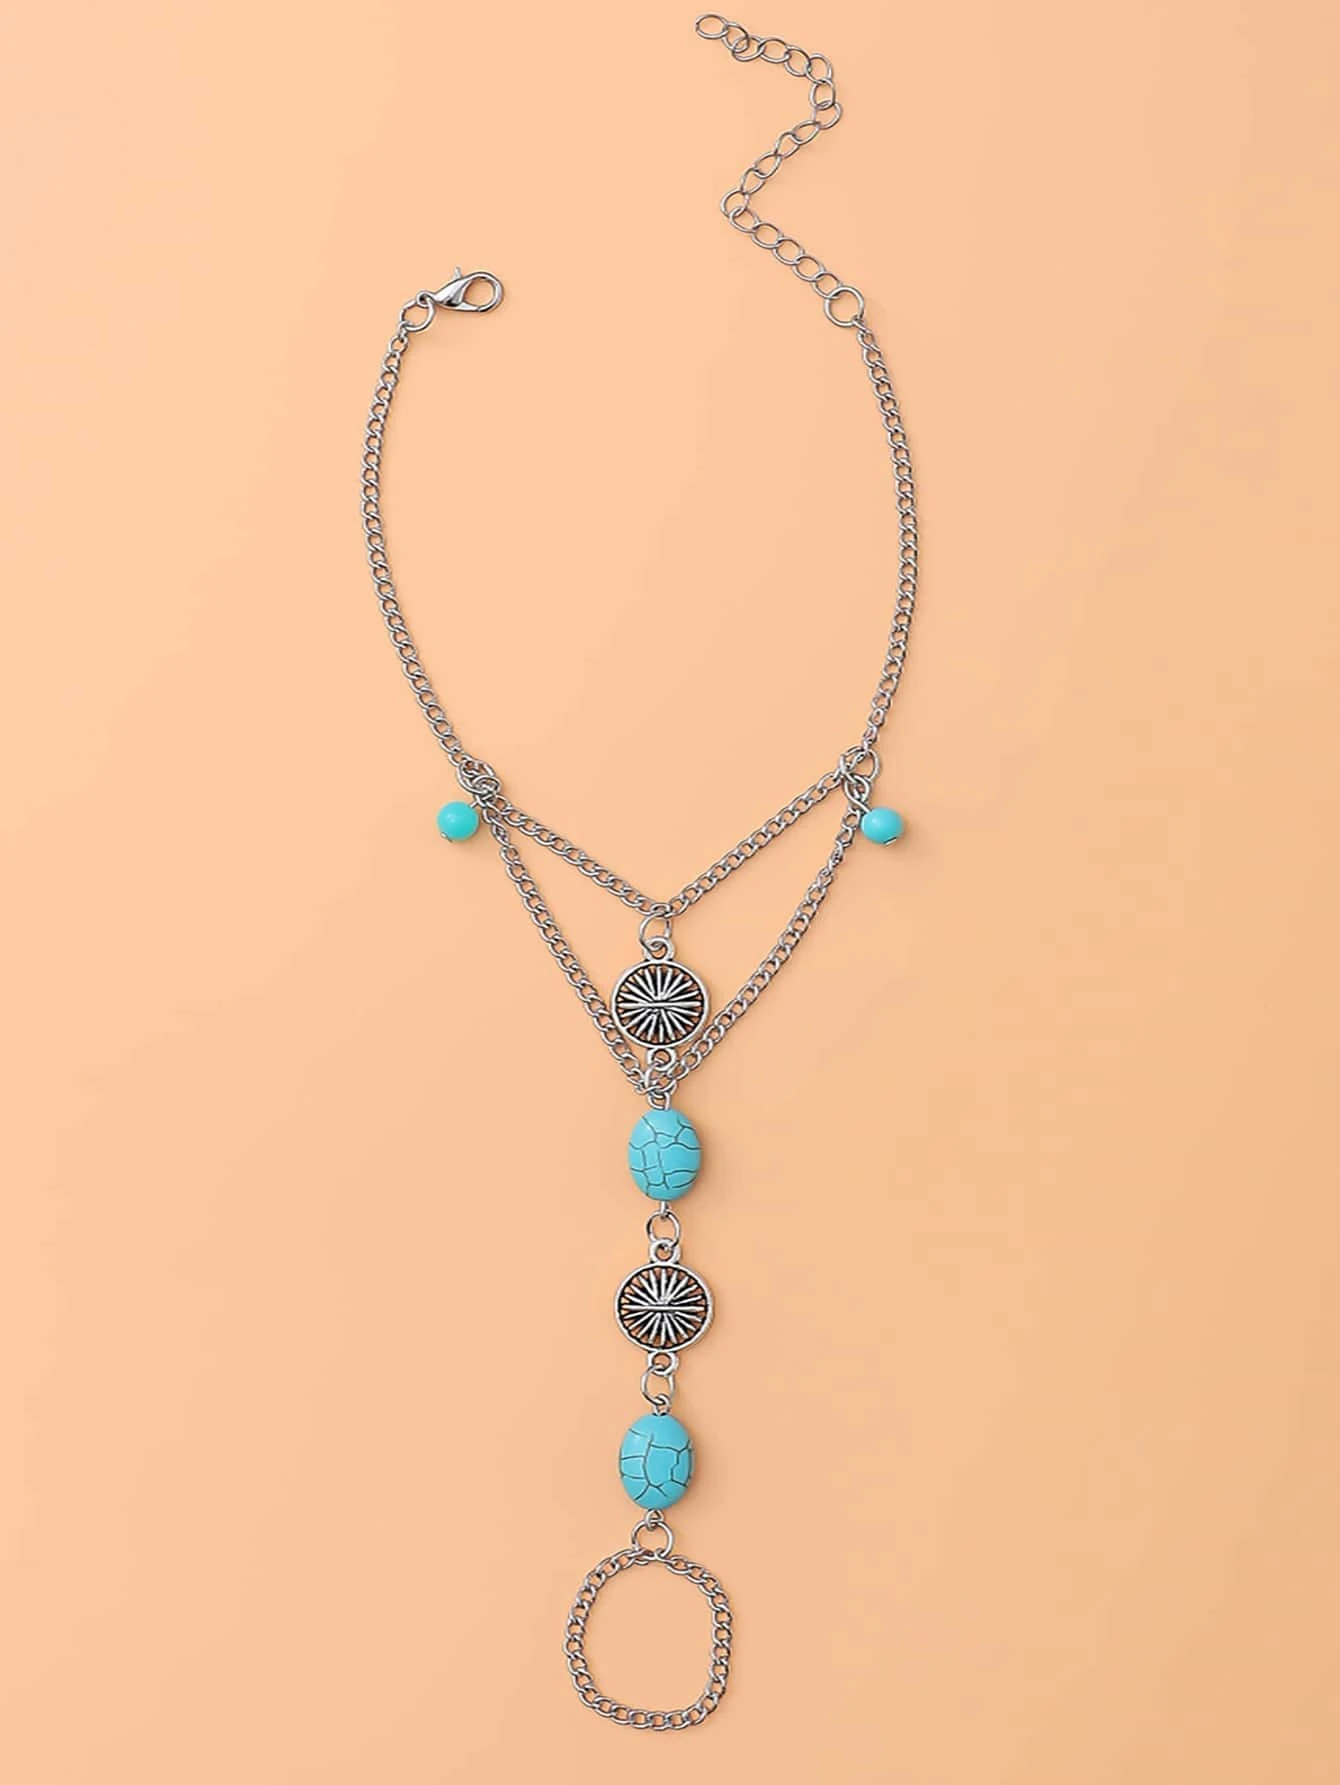 Turquoise Bead Detail Toe Ring Anklet Barefoot Sandal Anklet | Fashion Hut Jewelry